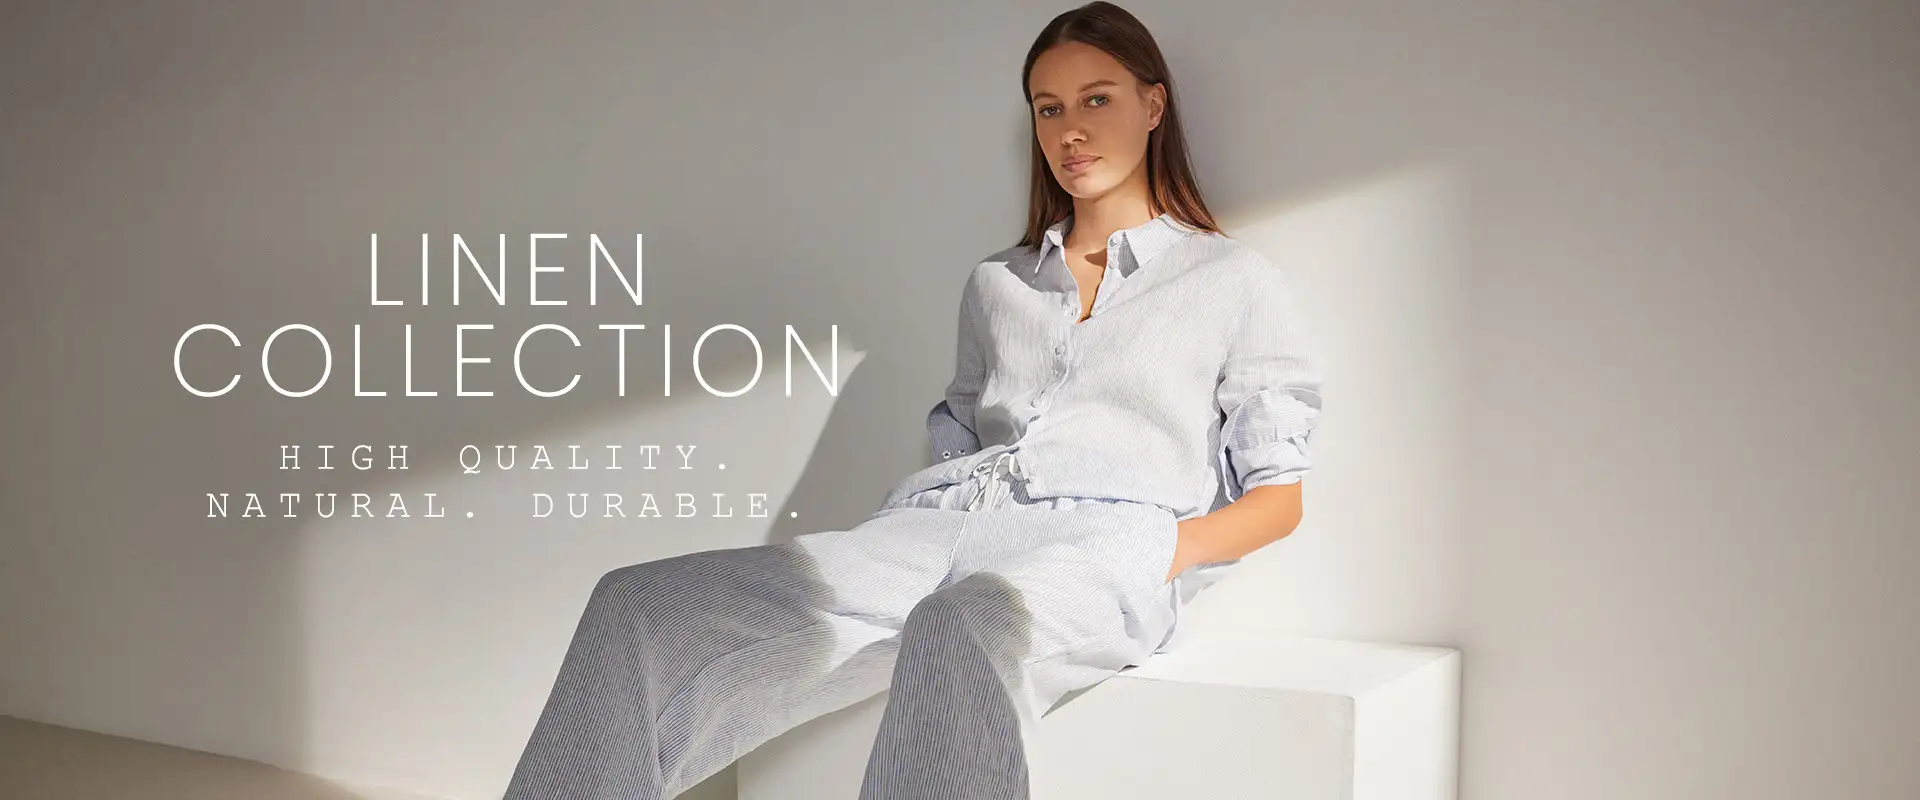 Linen Collection